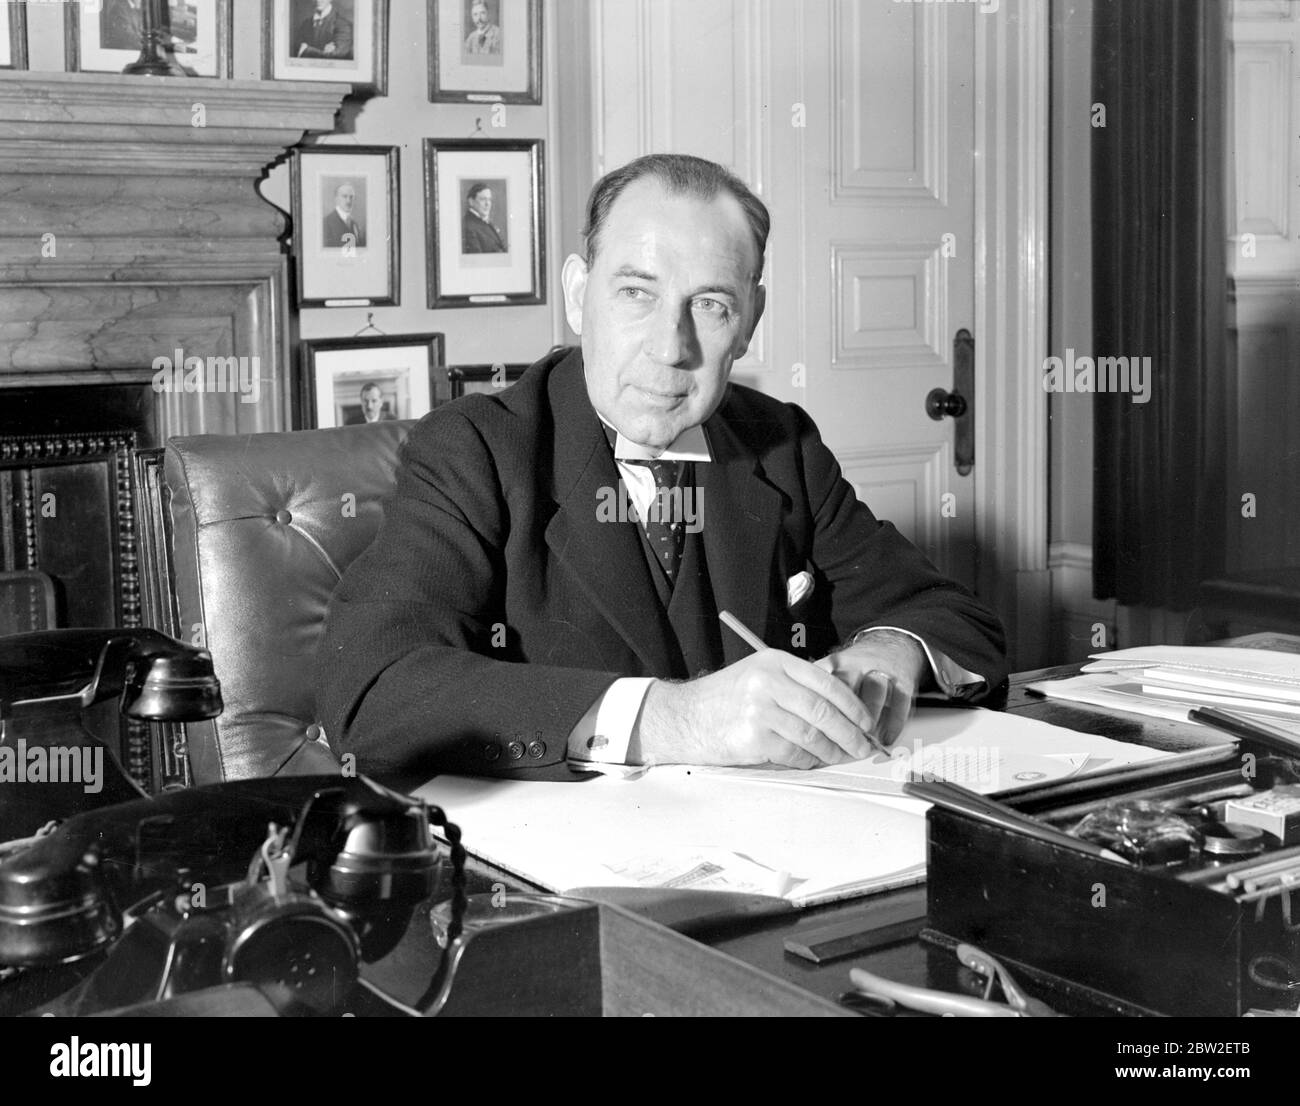 At the Home Office. Sir John Anderson, newly appointe Lord Privy Seal. 7 November 1938 Anderson, John, Sir (Viscount Waverly) British politician; governor of Bengal 1932-1937; British home secretary 1939-1940; British chancellor of the exchequer 1943-1945  1882-1958 Stock Photo